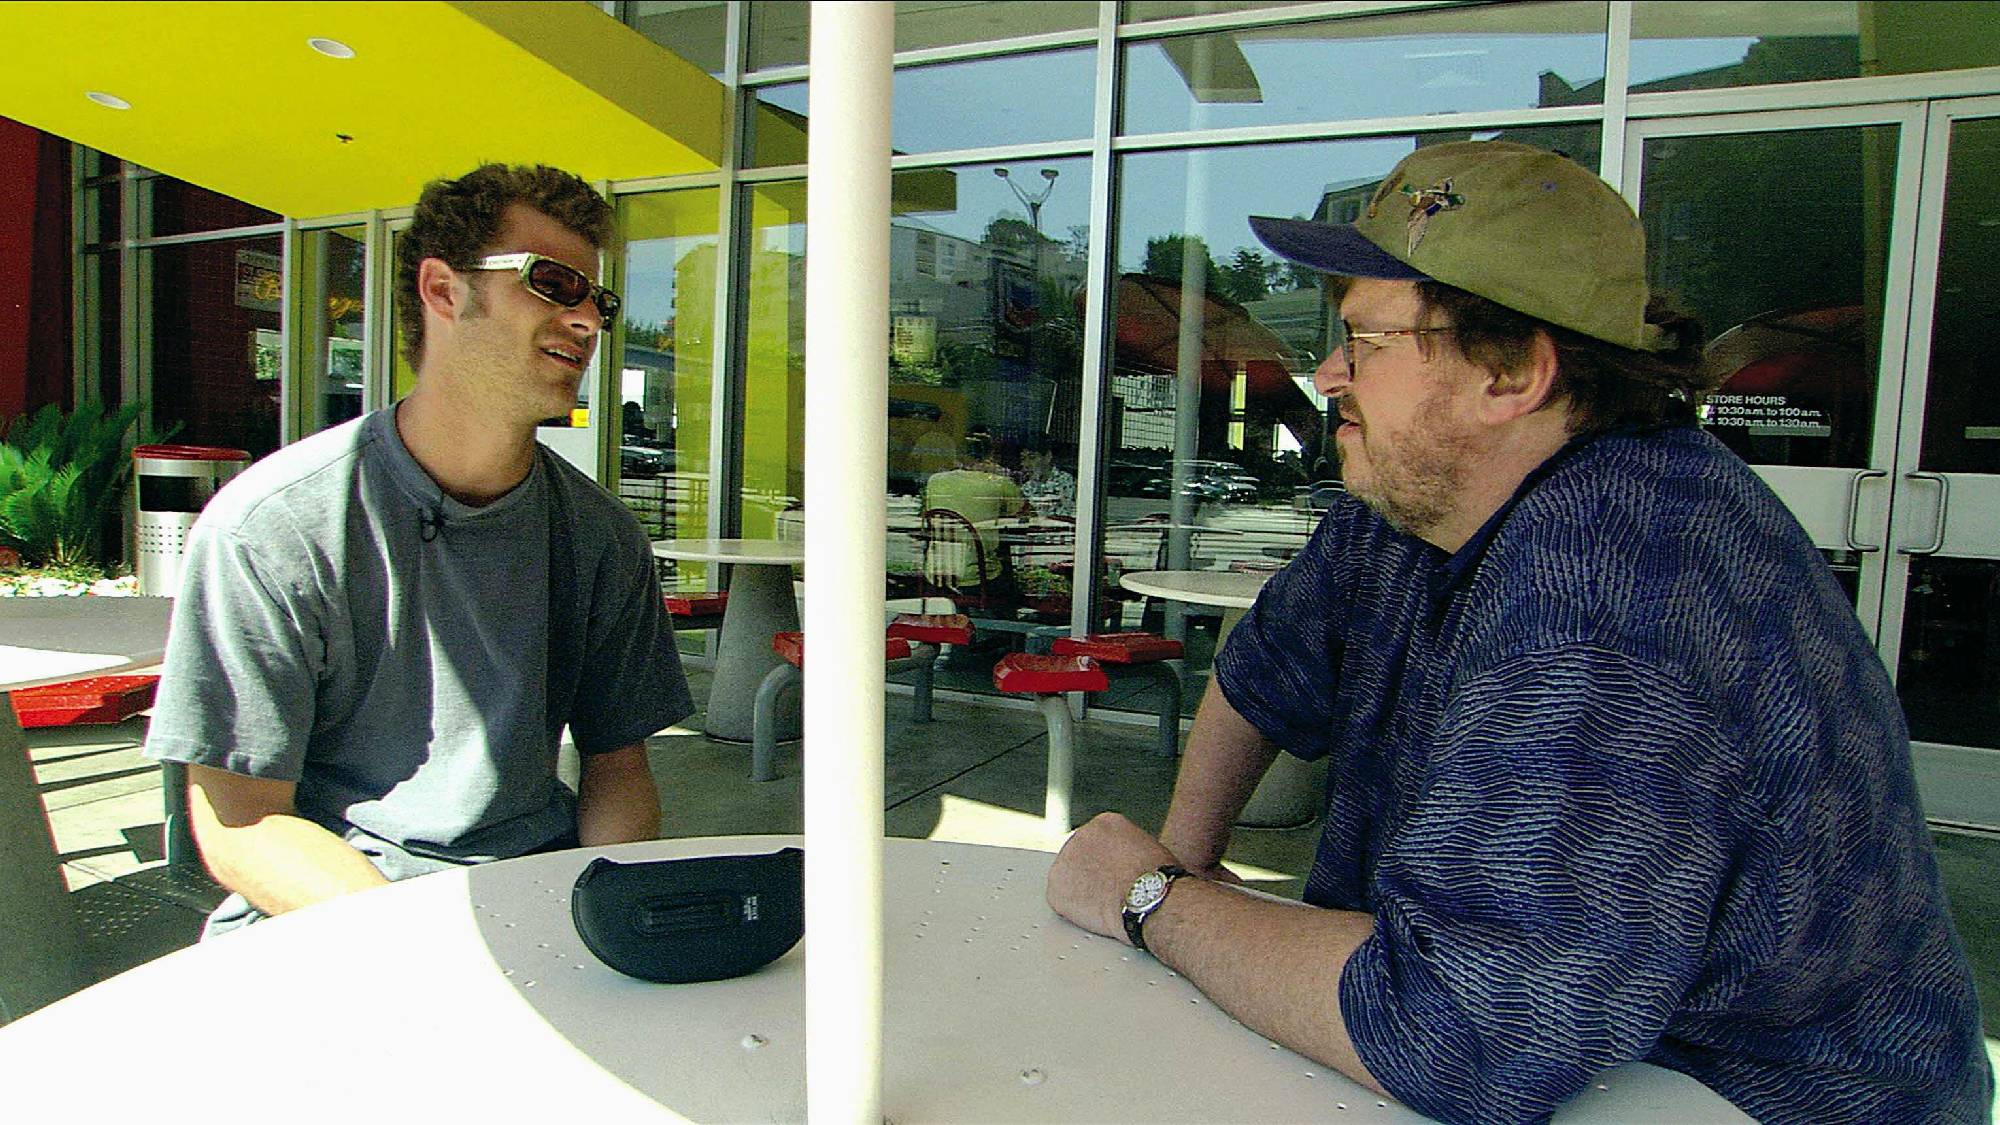 Matt Stone being interviewed by Michael Moore in Bowling for Columbine